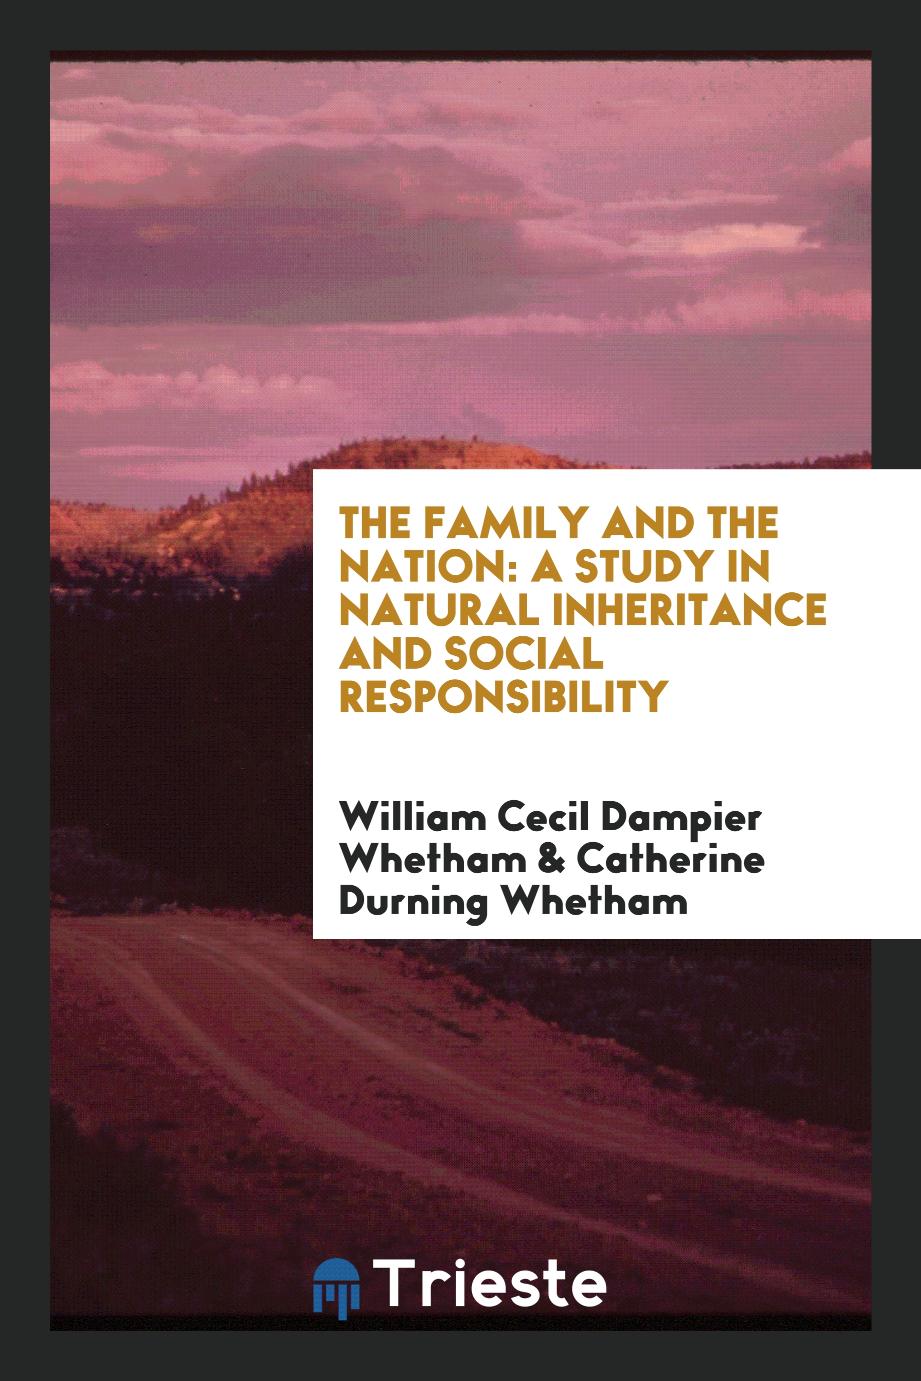 The family and the nation: a study in natural inheritance and social responsibility